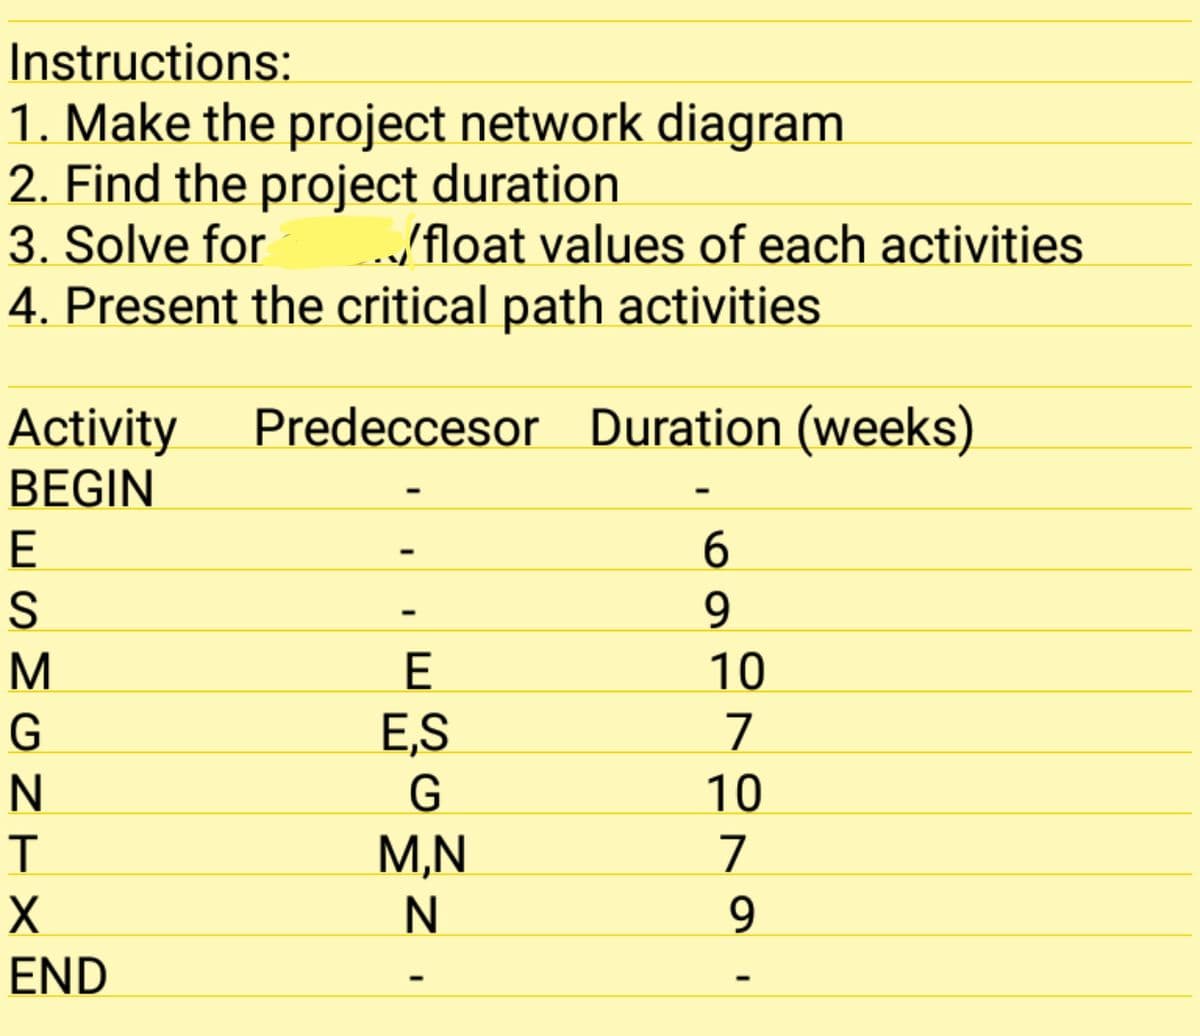 Instructions:
1. Make the project network diagram
2. Find the project duration
3. Solve for
../float values of each activities
4. Present the critical path activities
Predeccesor Duration (weeks)
Activity
BEGIN
6.
9.
10
E,S
7
10
M,N
7
9.
END
ESMGNTX티
